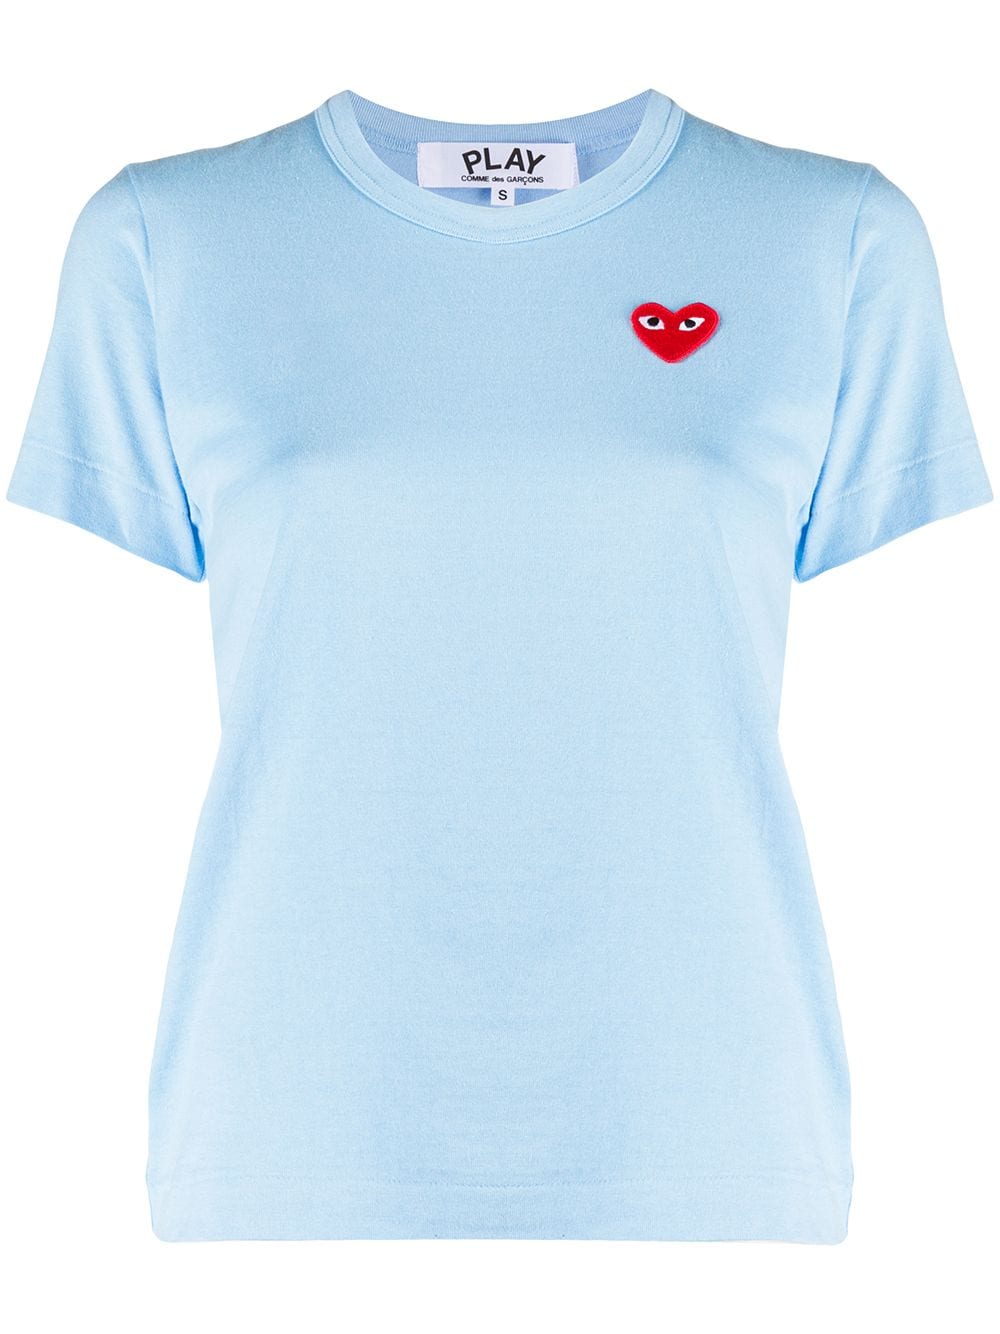 CDG Play Heart Red Coeur à manches courtes T-S 1